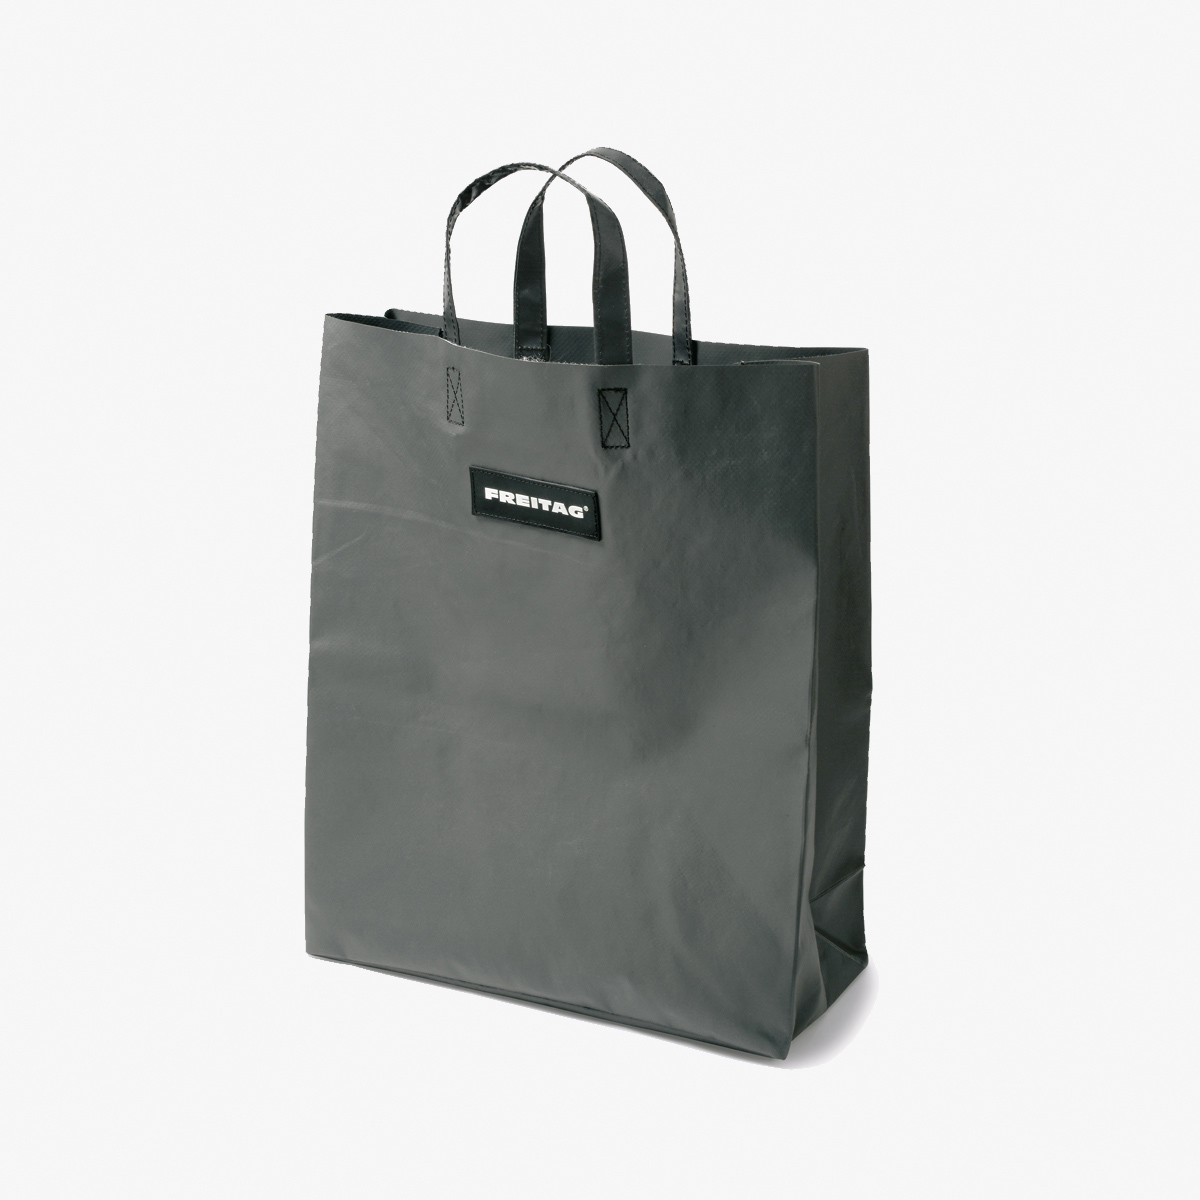 FREITAG :: F52 MIAMI VICE :: A simple super-functional shopping